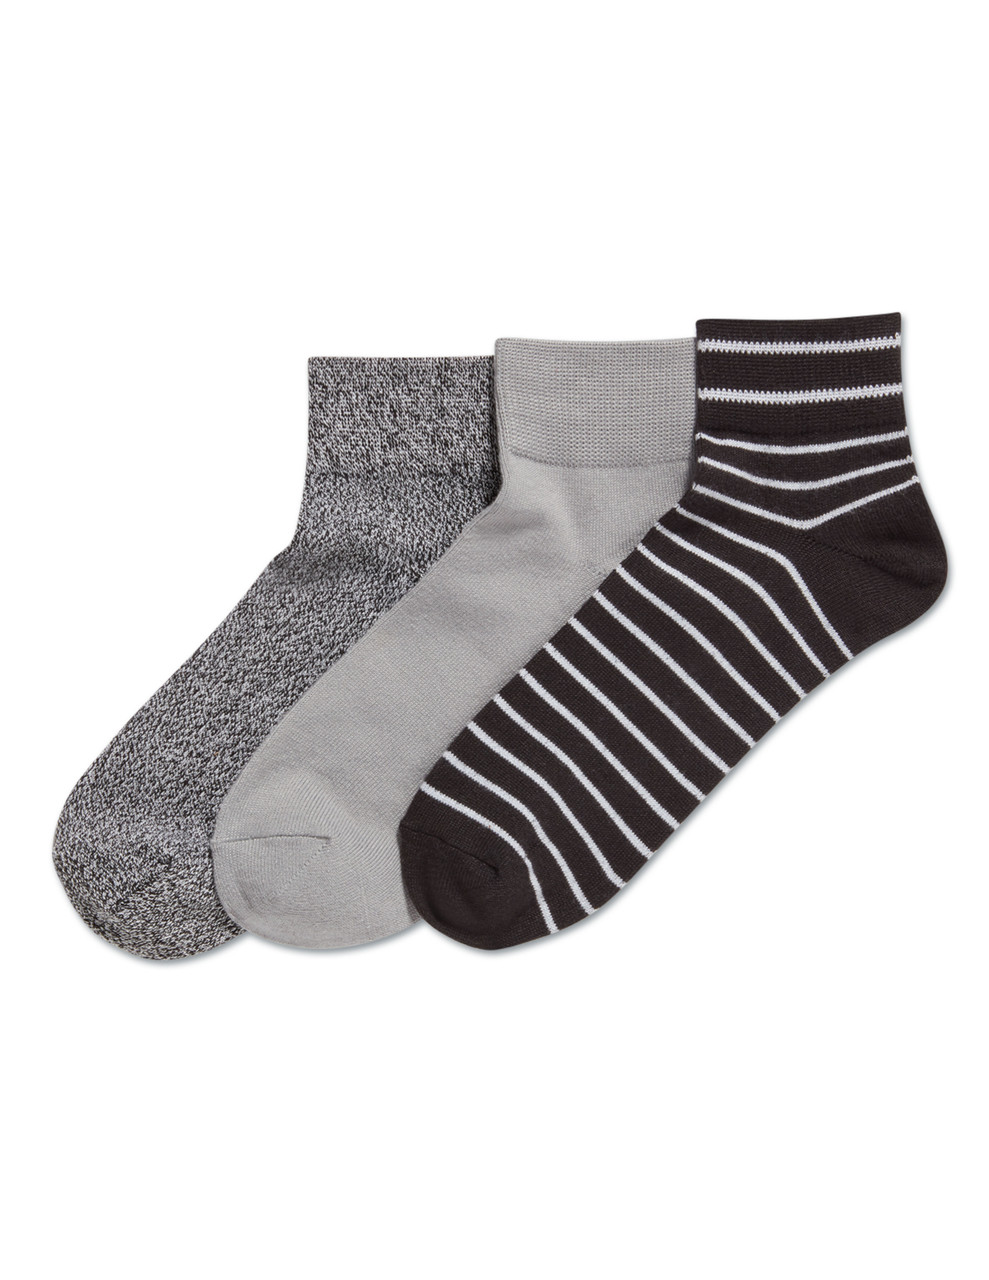 No nonsense X-sport Marled Double Tab No Show Athletic Sock, 3